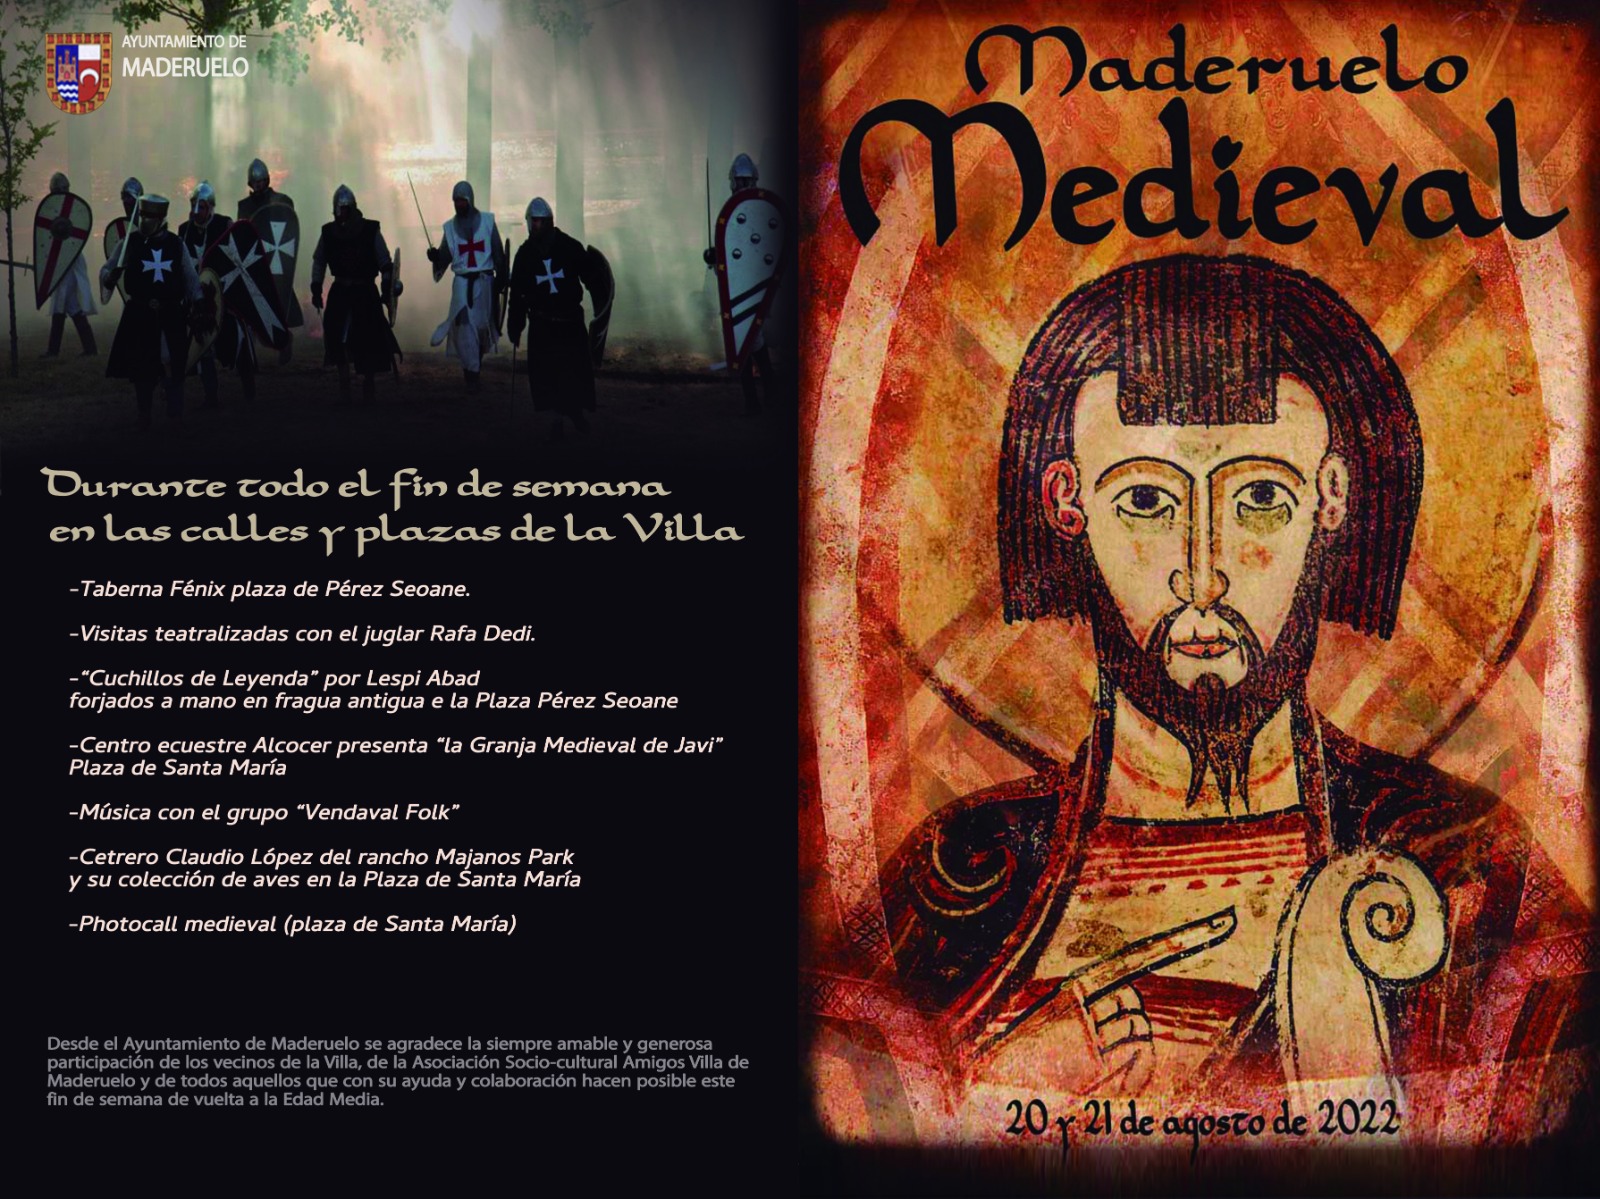 Maderuelo Medieval